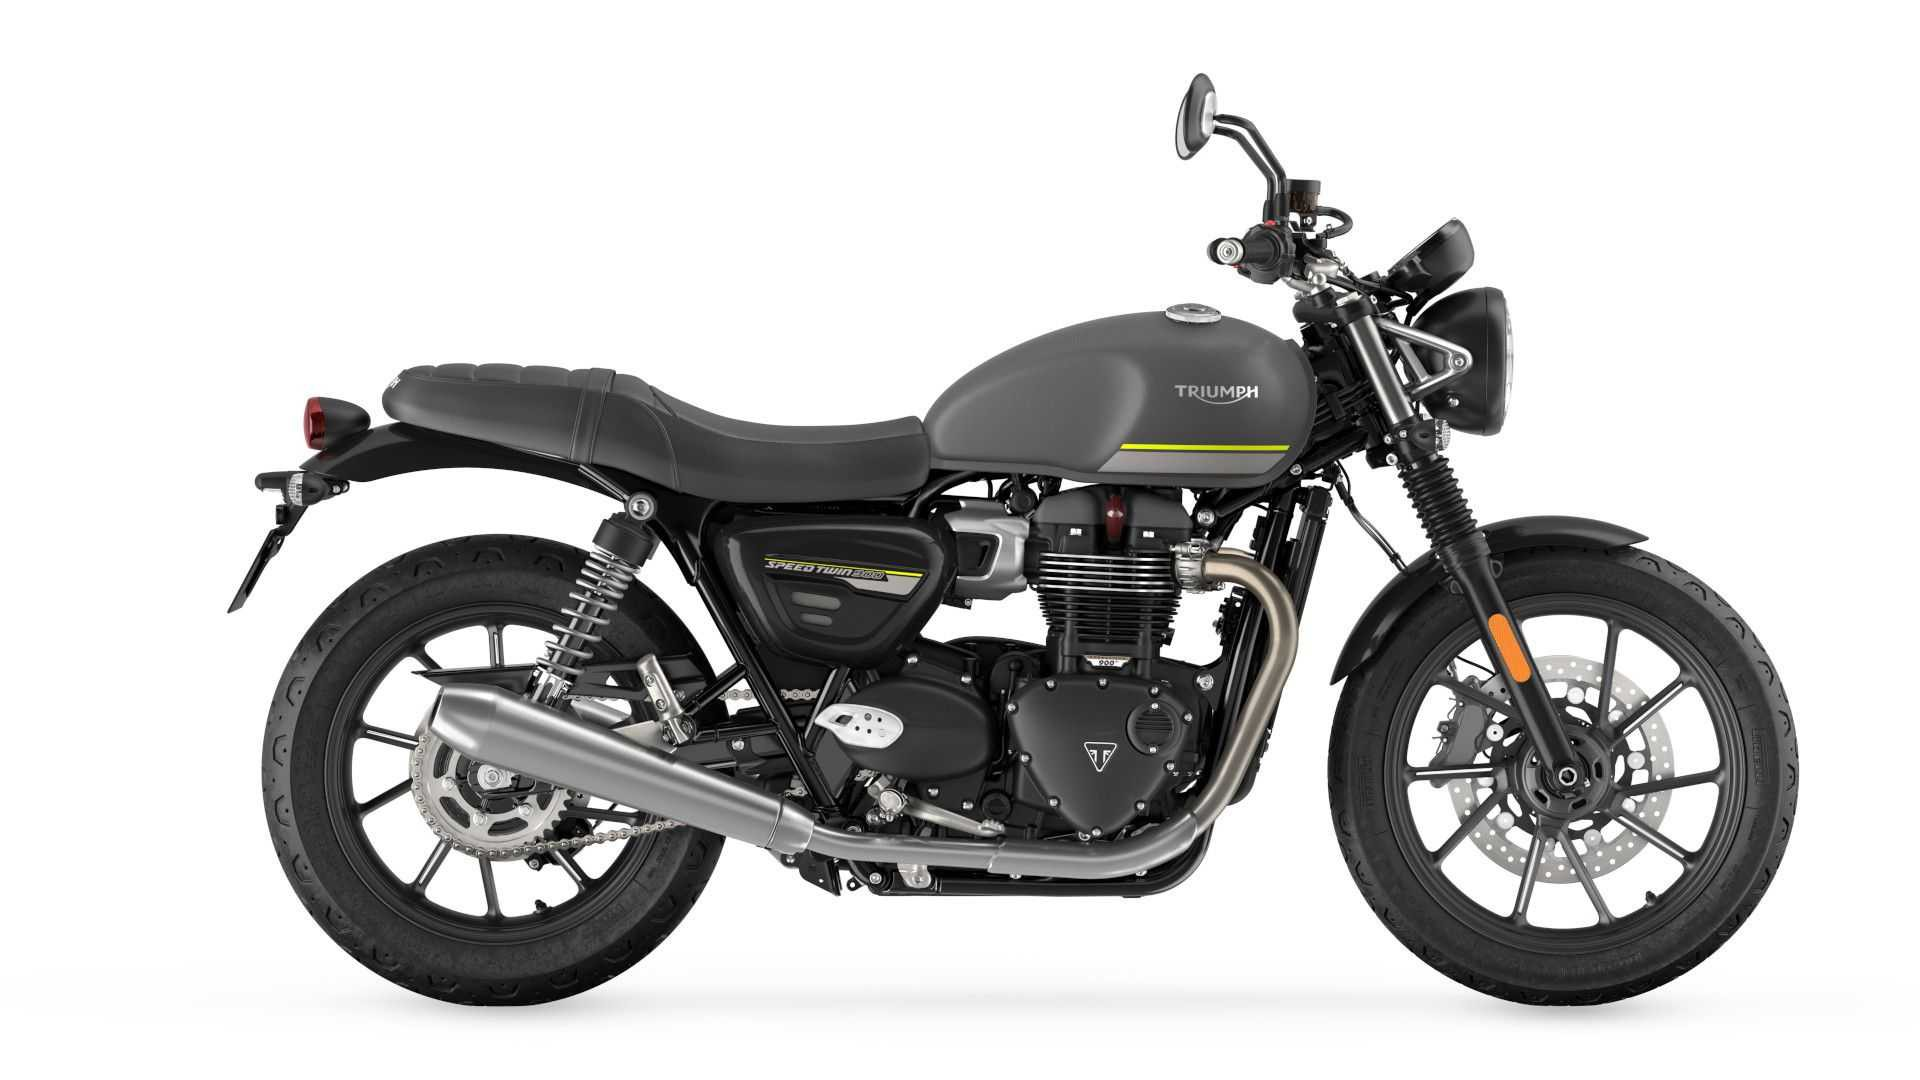 Expectedly, Triumph releases the Speed Twin 900 and Scrambler 900.